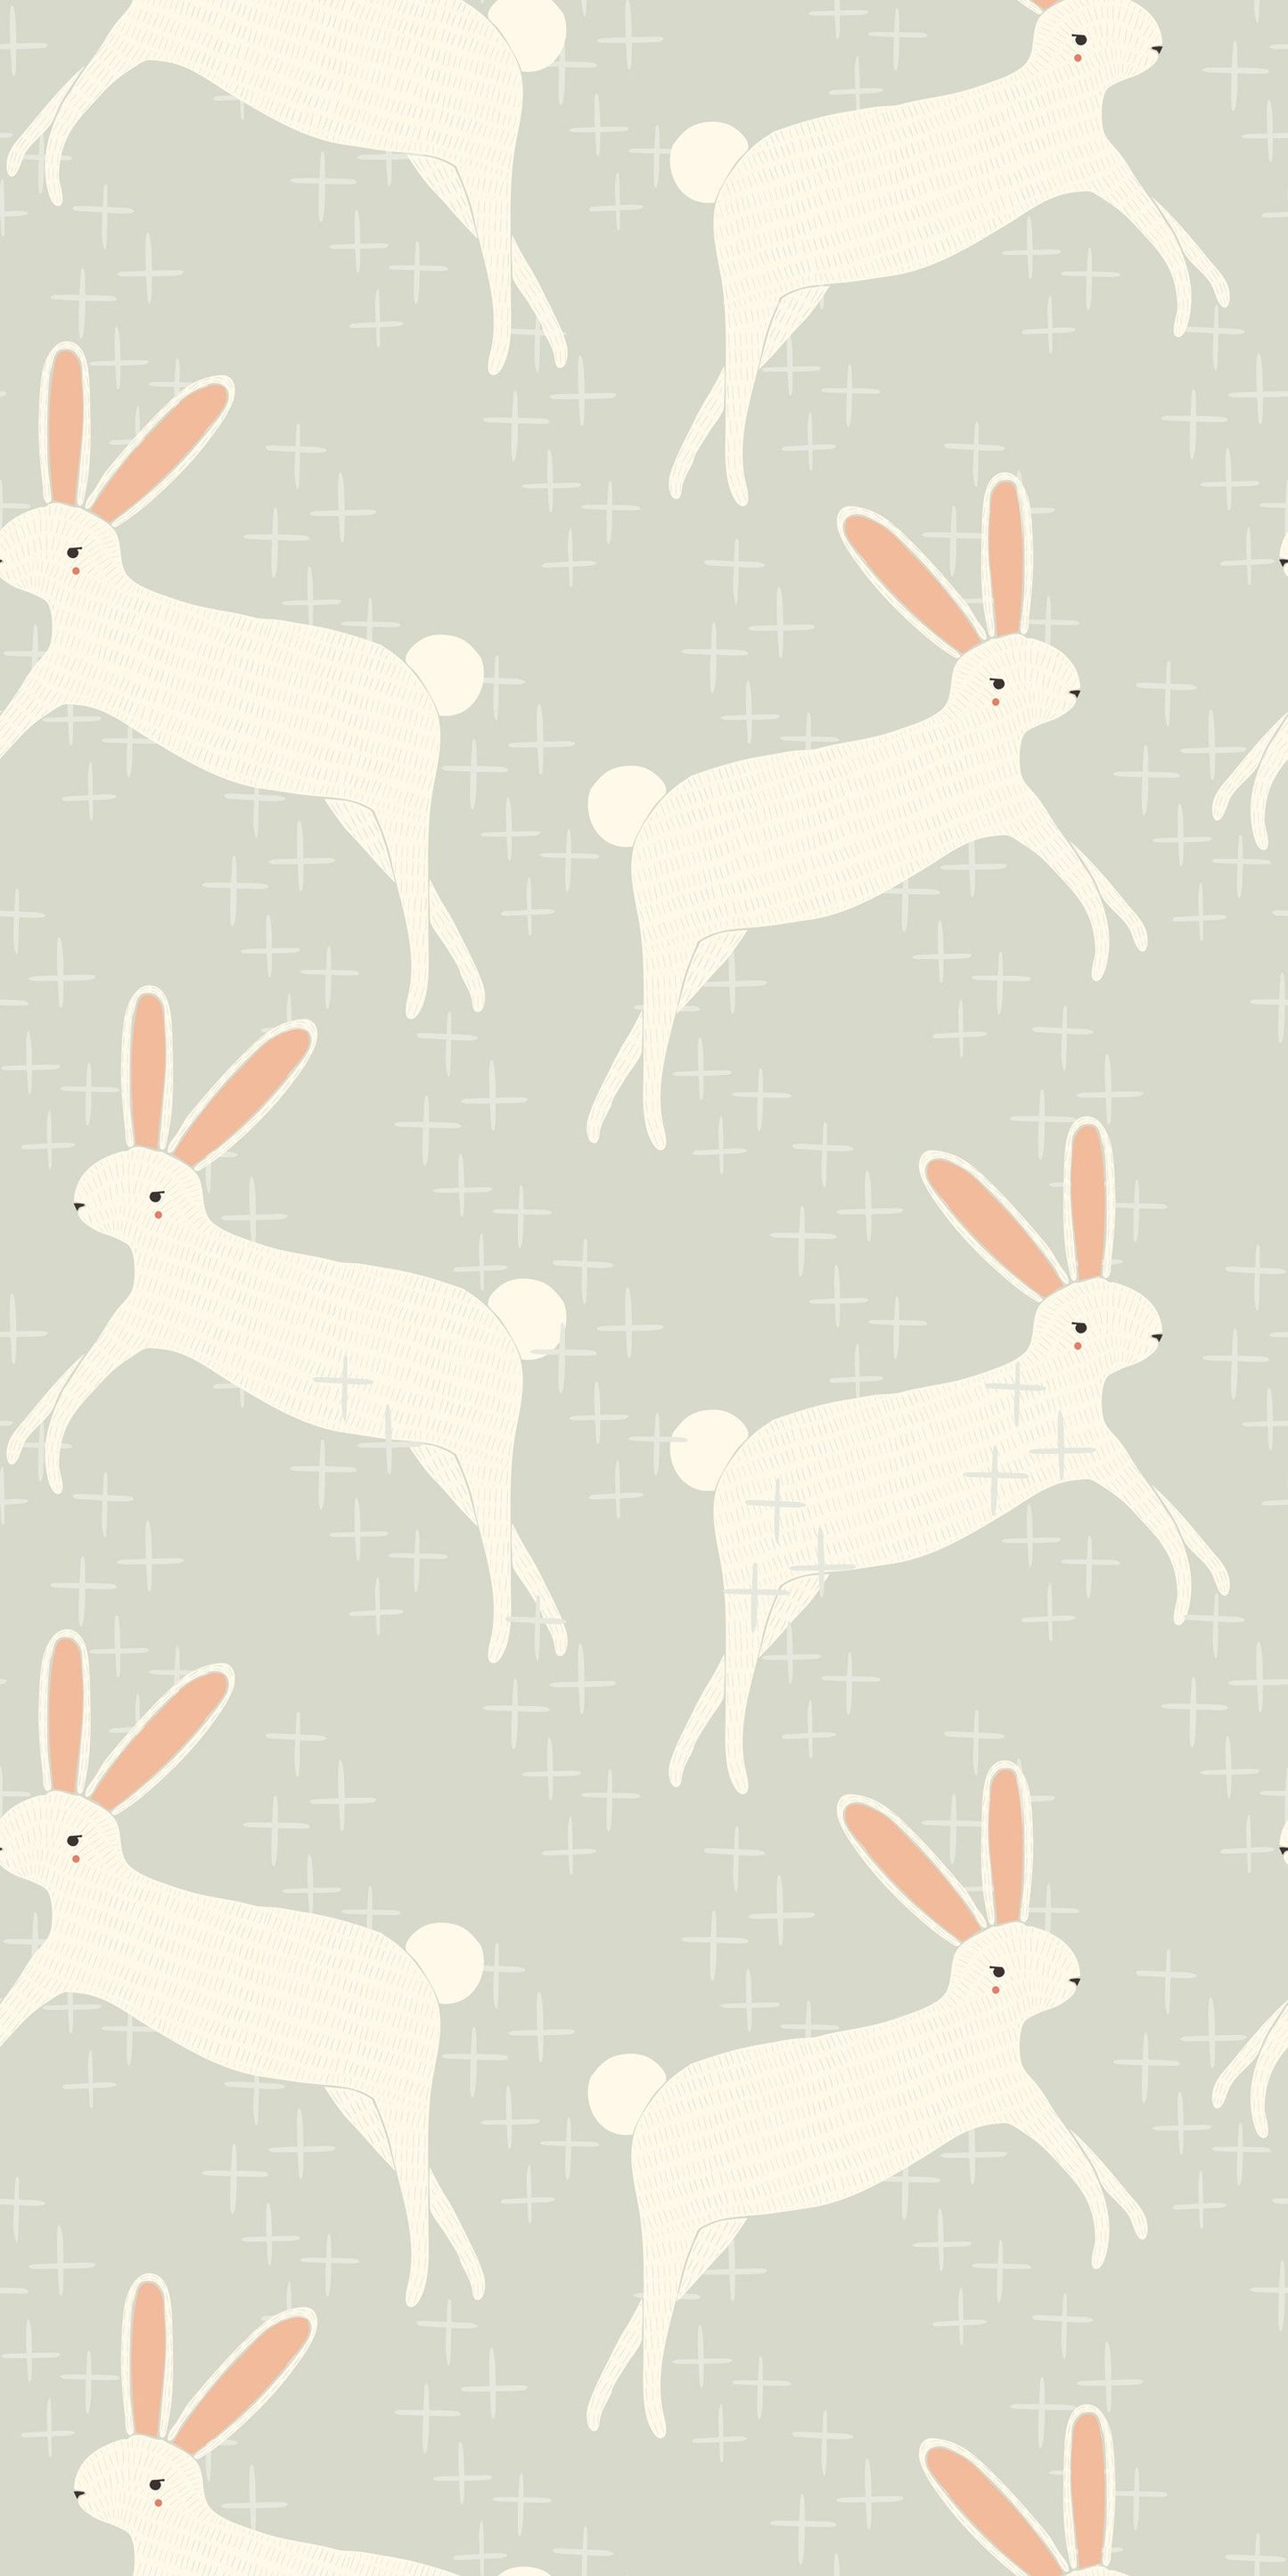 Leaping Bunnies